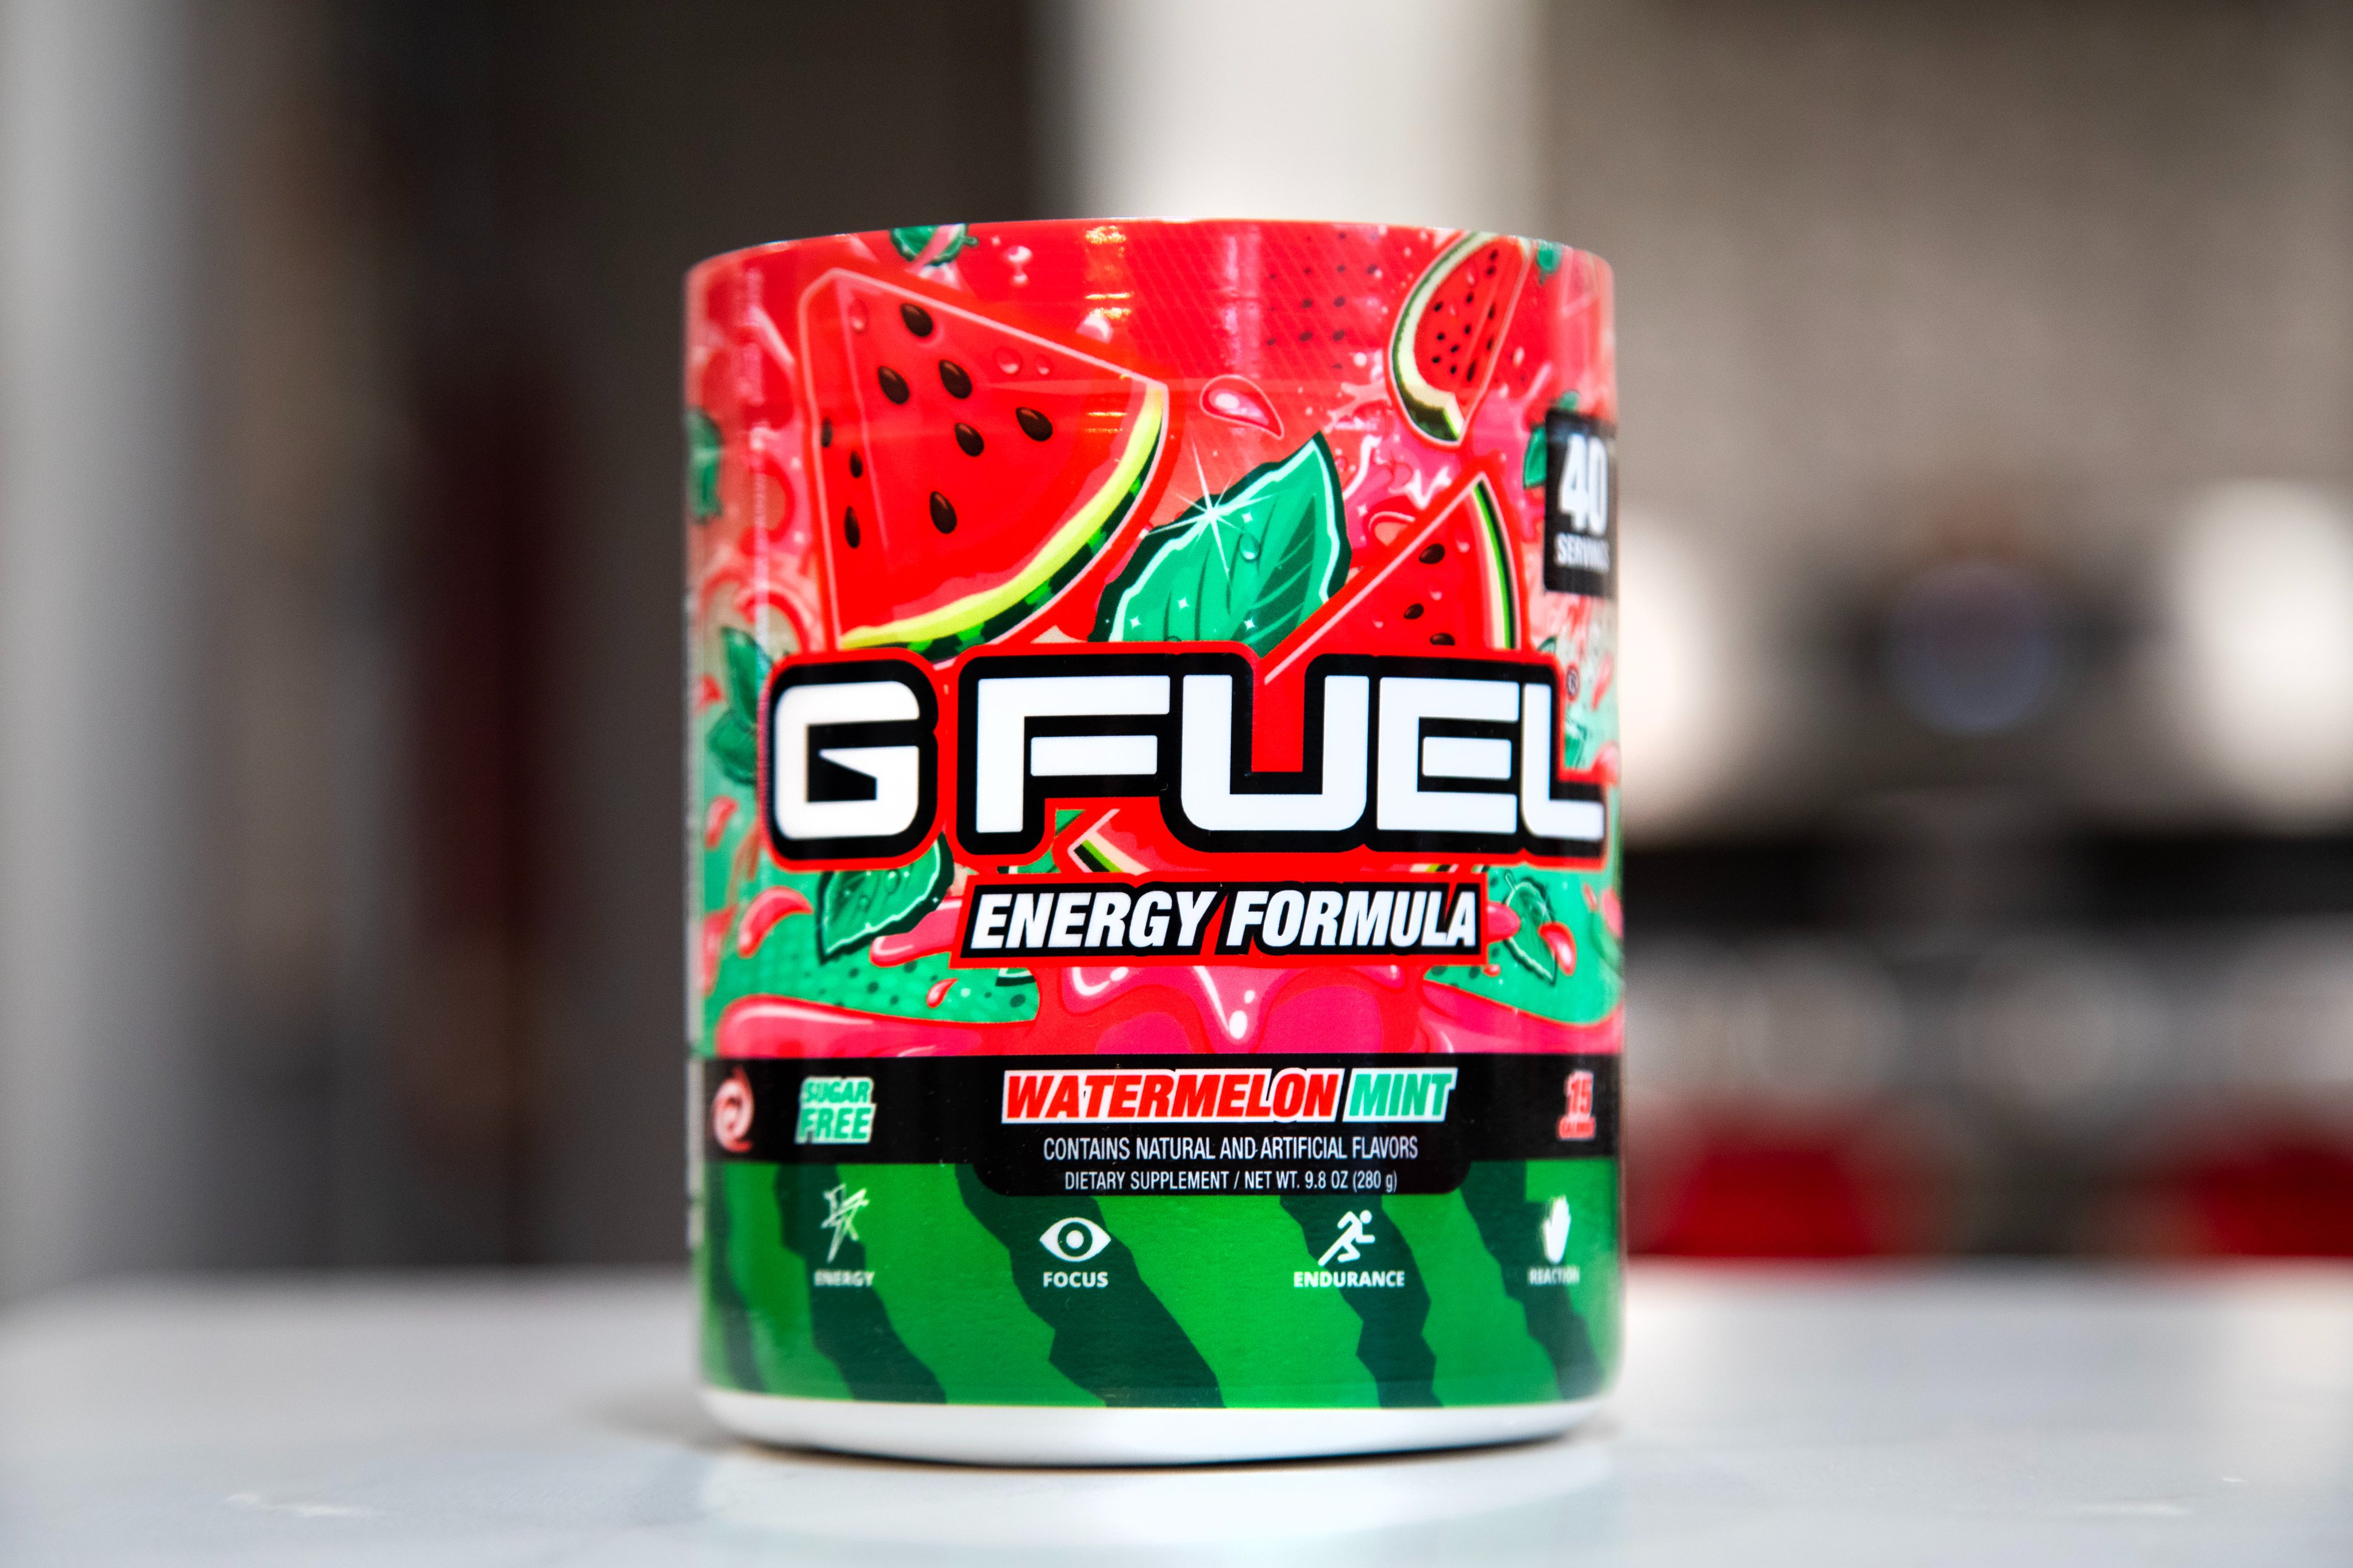 What y'all drinking today I got some black ice : r/GFUEL